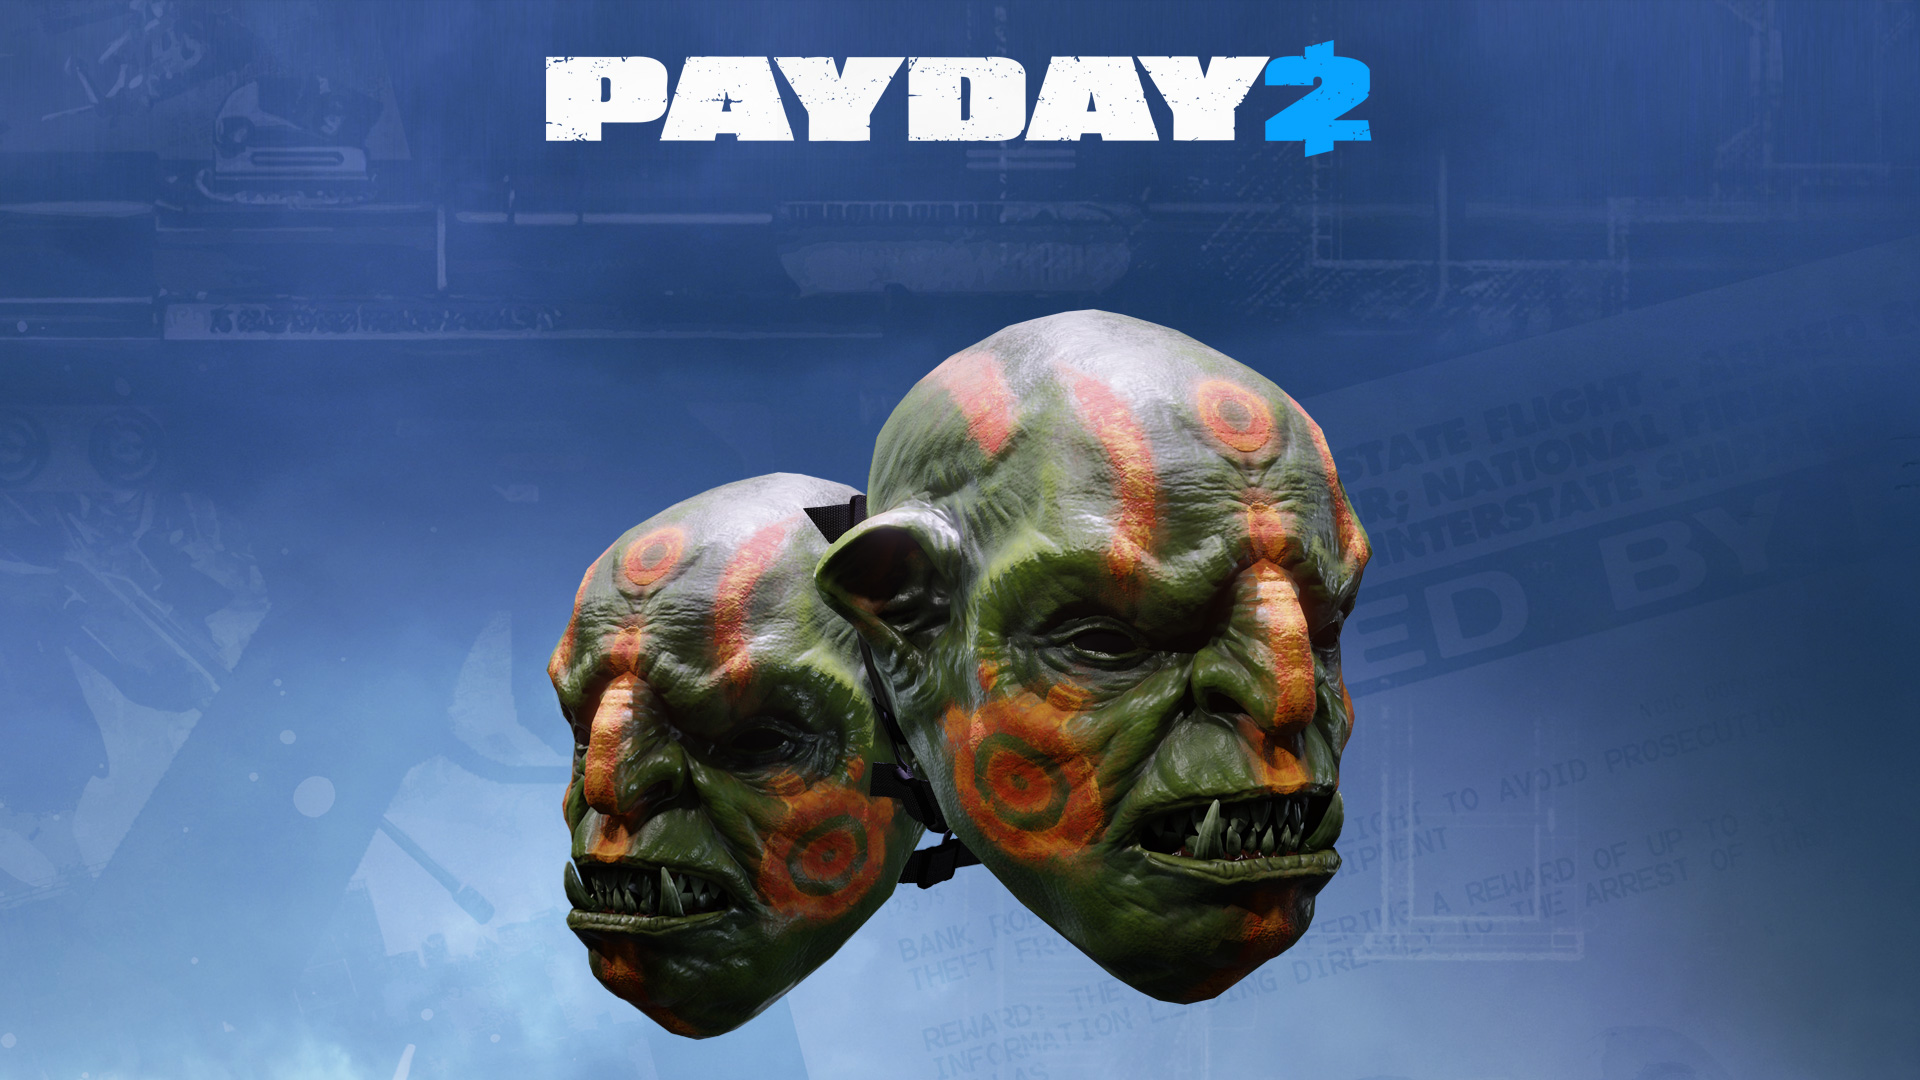 Steam must be running to play this game payday 2 фото 32